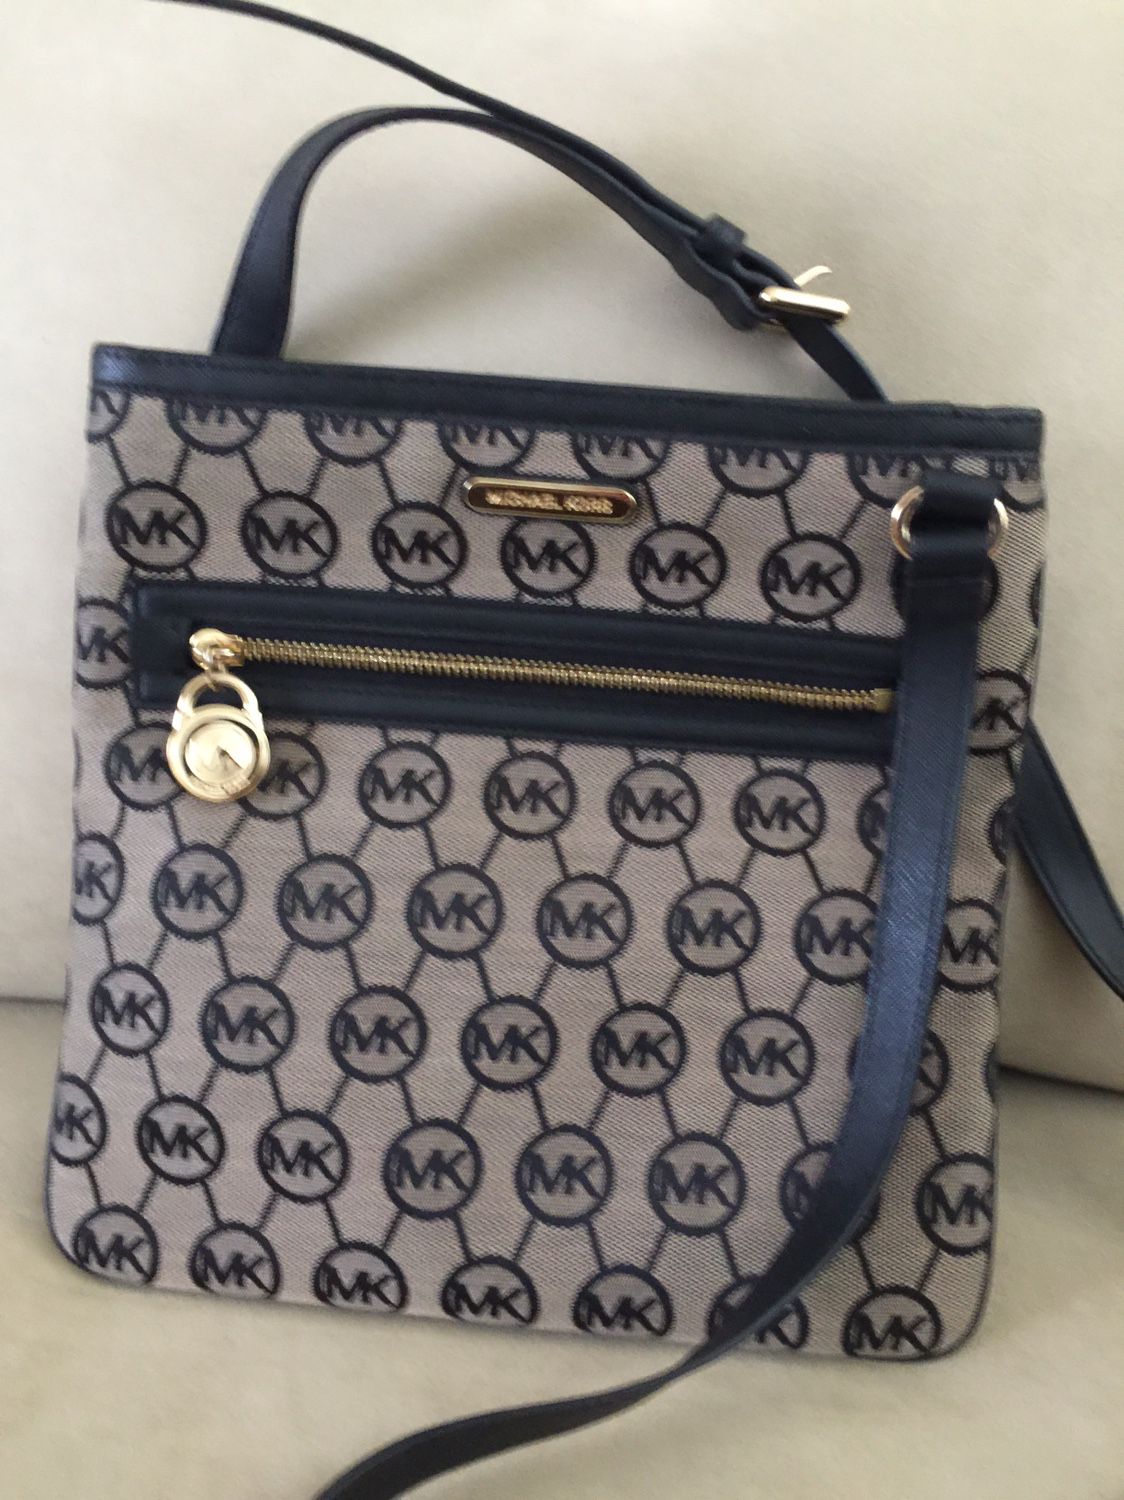 Michael Kors Purse for Sale in Colorado Springs, CO - OfferUp